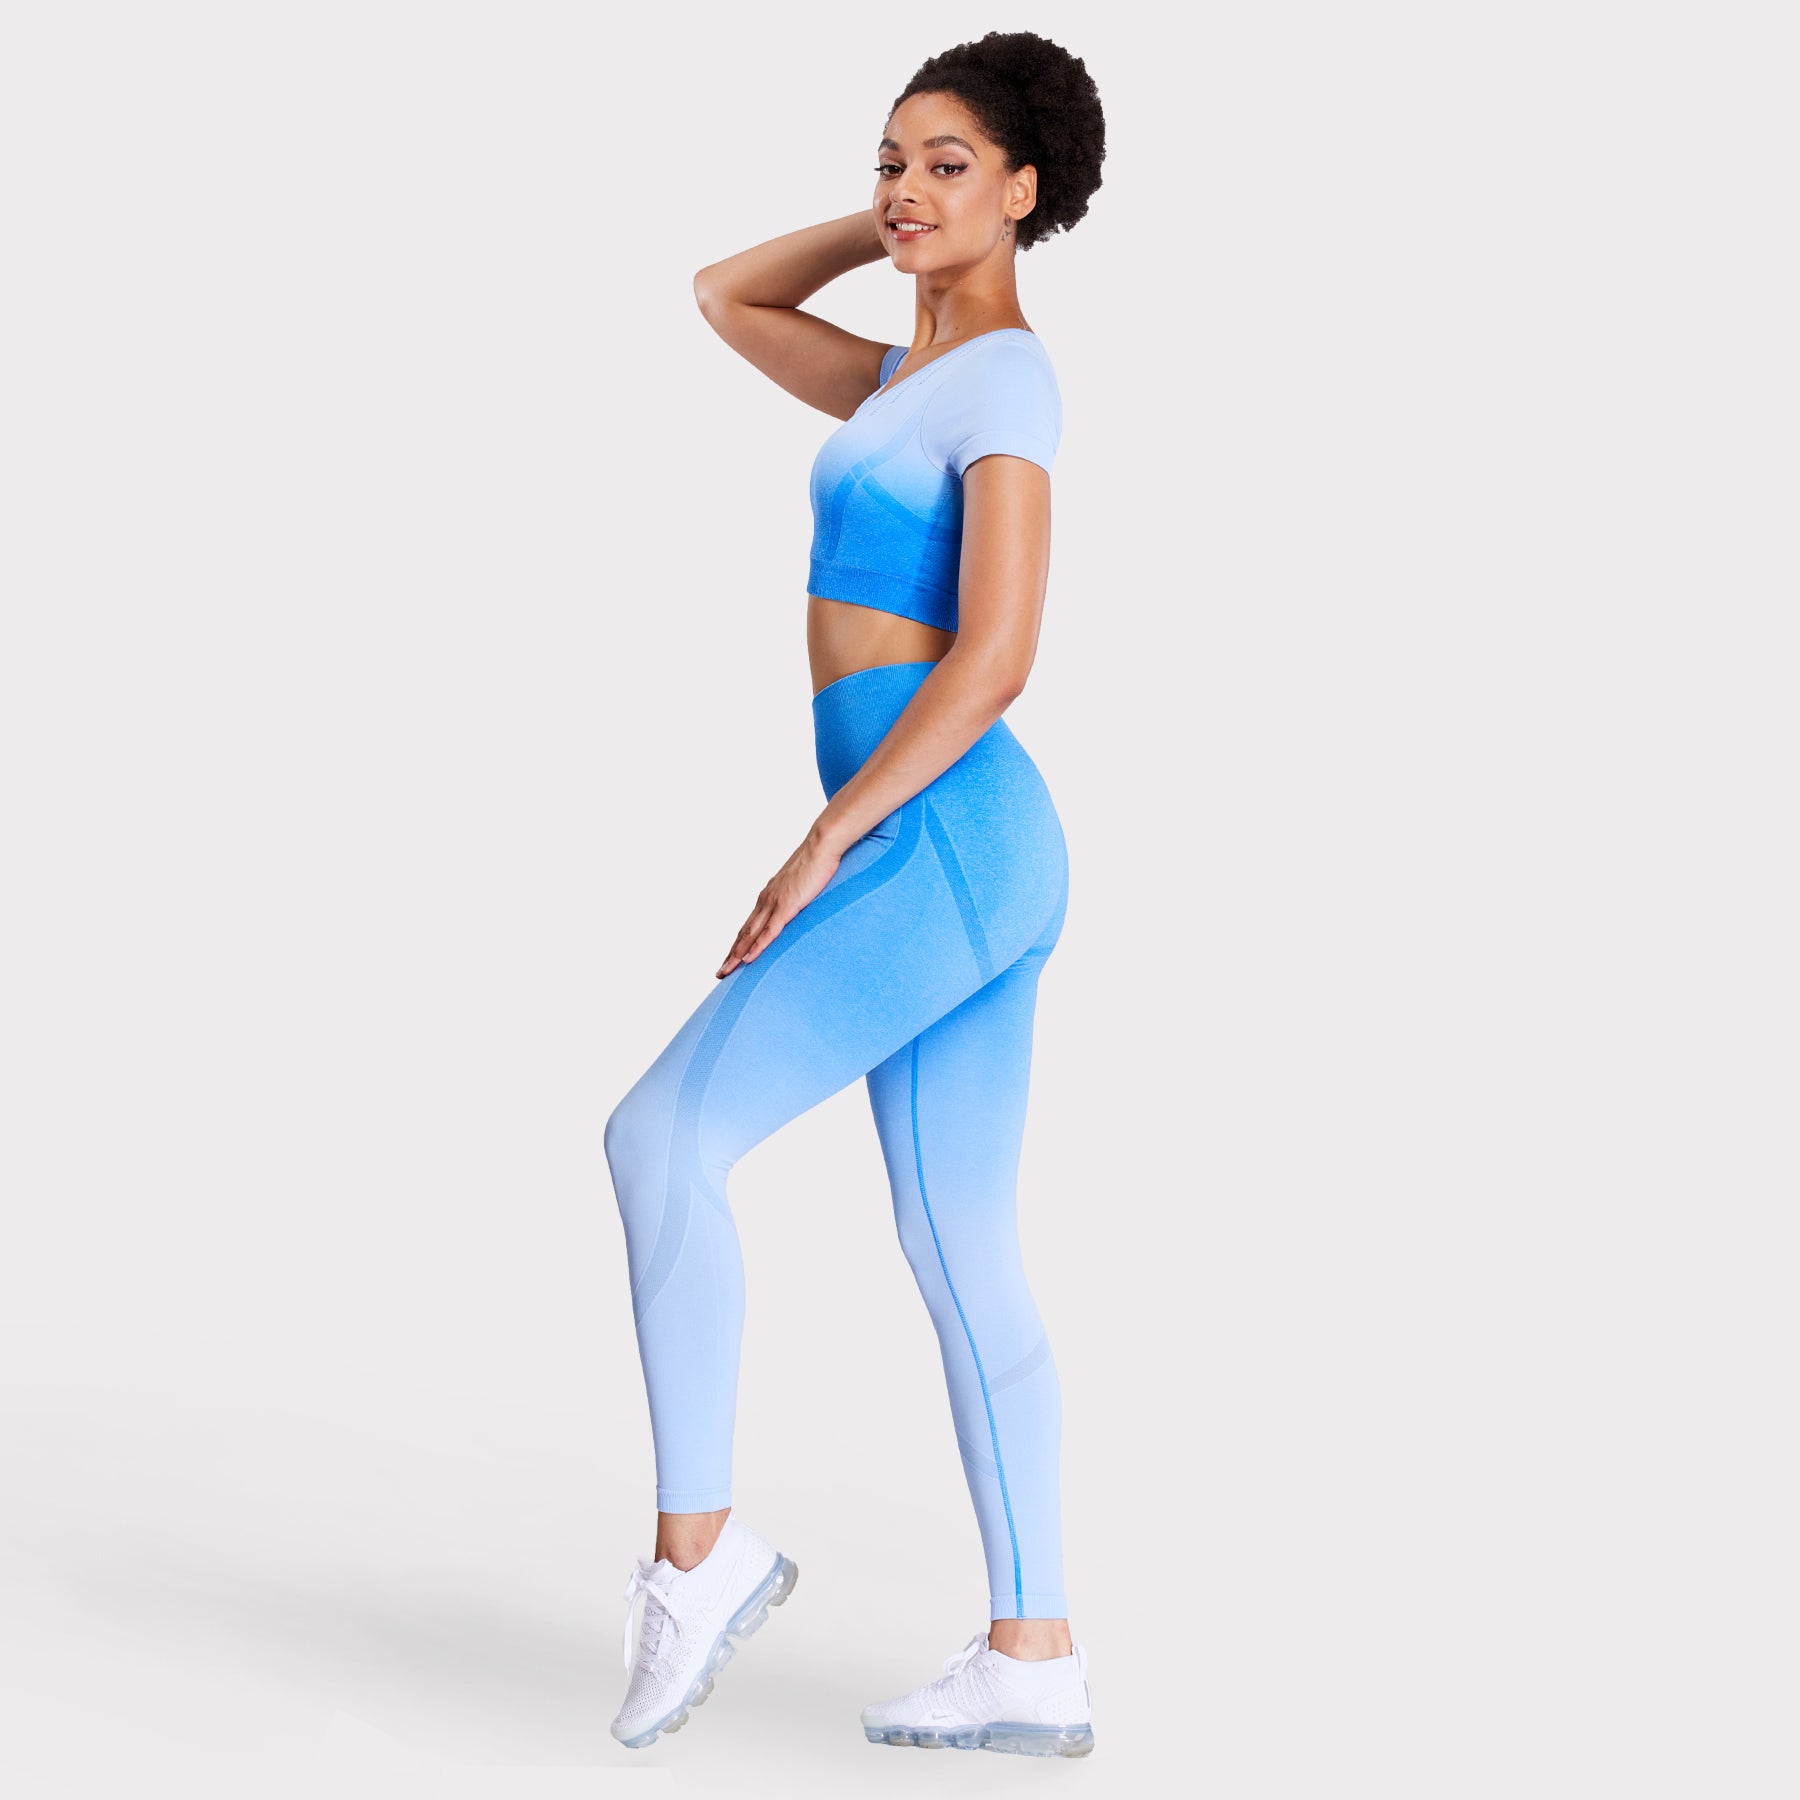 Big Girls' Seamless Athletic Leggings For Outdoor Sports, Fitness, Yoga,  And Aerobic Activities With Peach Hip Enhancement And Ombre Blue Gradient